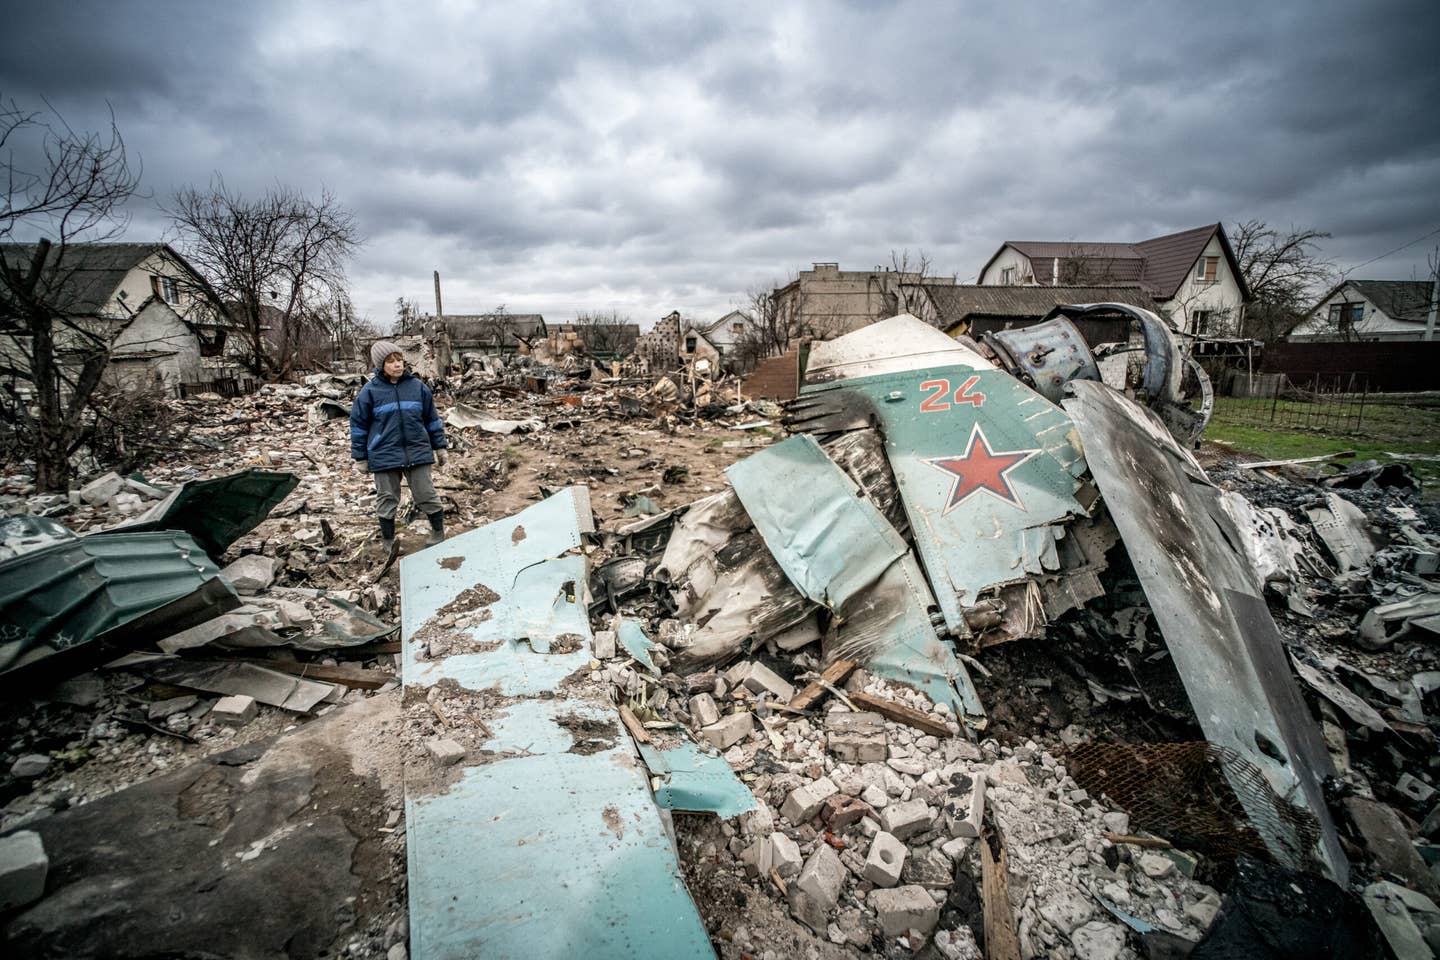 A Russian Su-34 strike jet shot down by Ukrainian anti-aircraft defenses crashed in a residential area of Chernihiv, Ukraine. <em>Photo by: Nicola Marfisi/AGF/Universal Images Group via Getty Images</em>